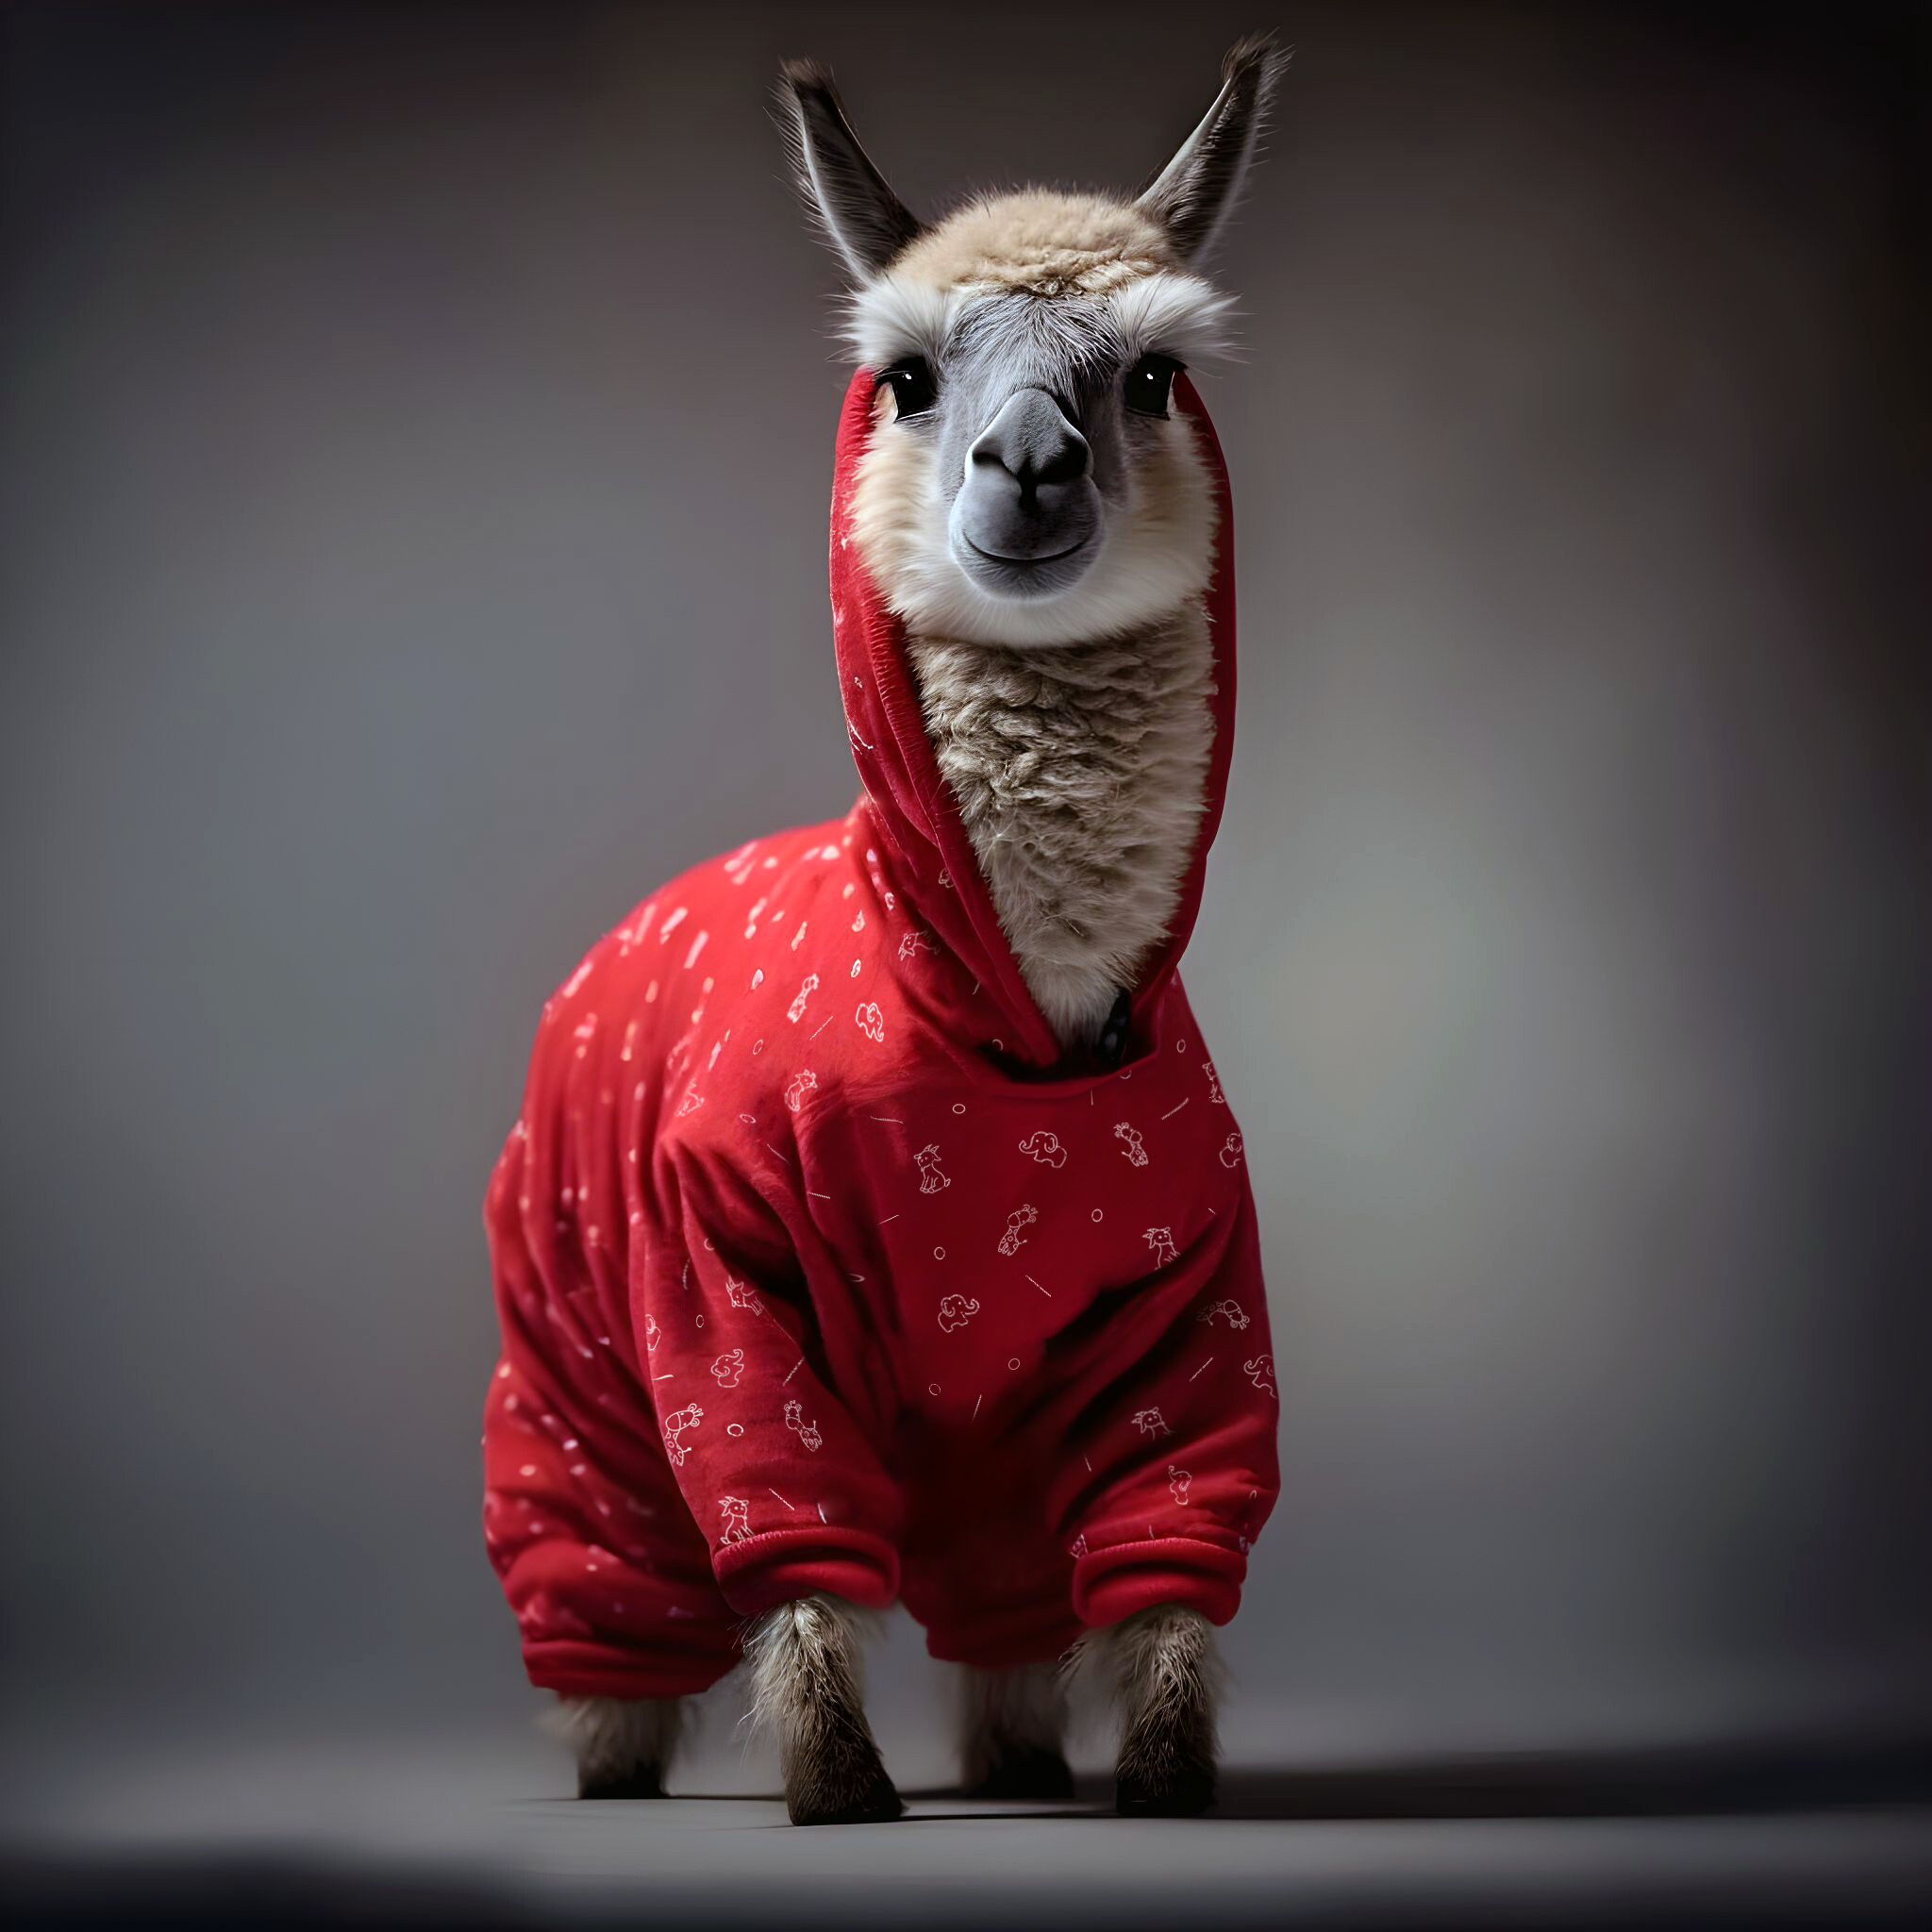 RedPajama, a to create open-source models, by reproducing LLaMA training dataset of over 1.2 trillion tokens TOGETHER